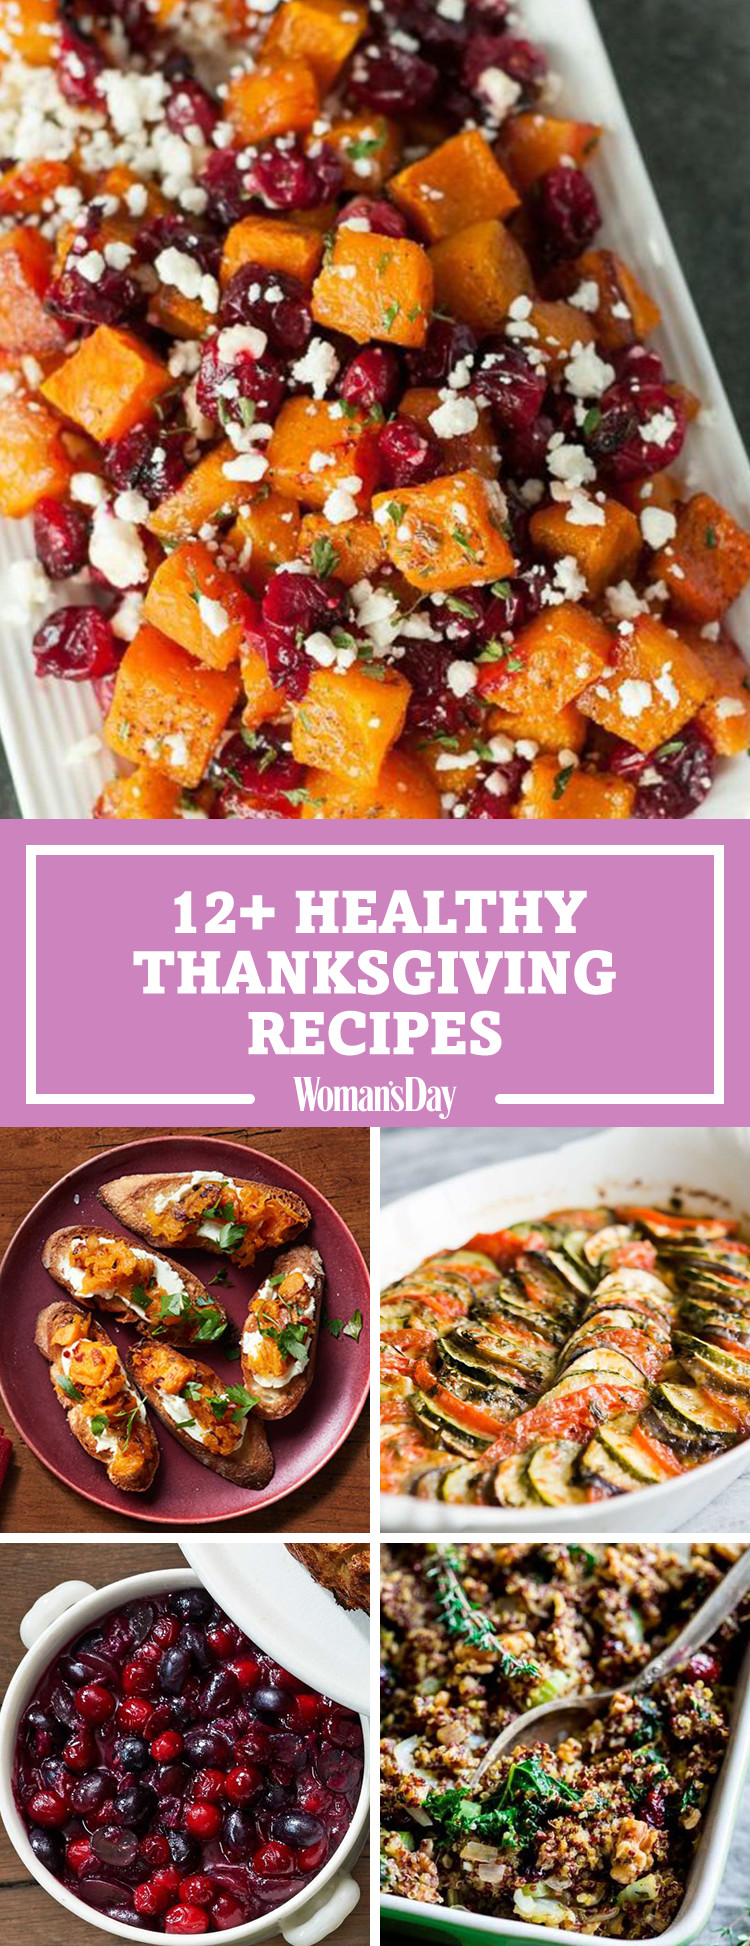 Healthy Thanksgiving Menu
 16 Healthy Thanksgiving Dinner Recipes Healthier Sides